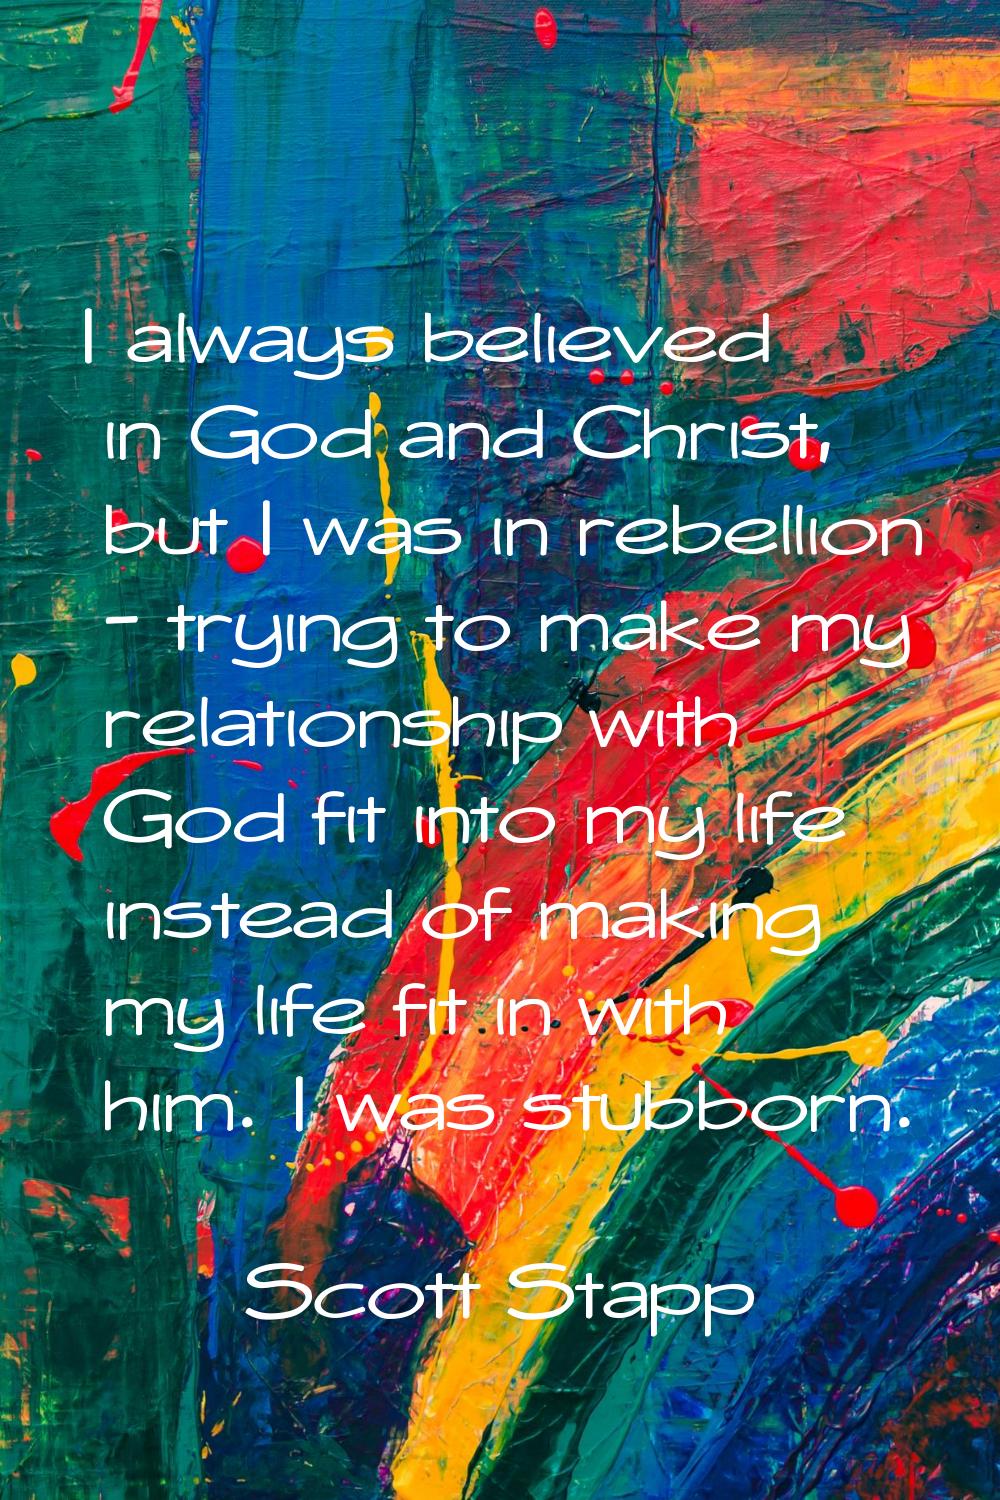 I always believed in God and Christ, but I was in rebellion - trying to make my relationship with G